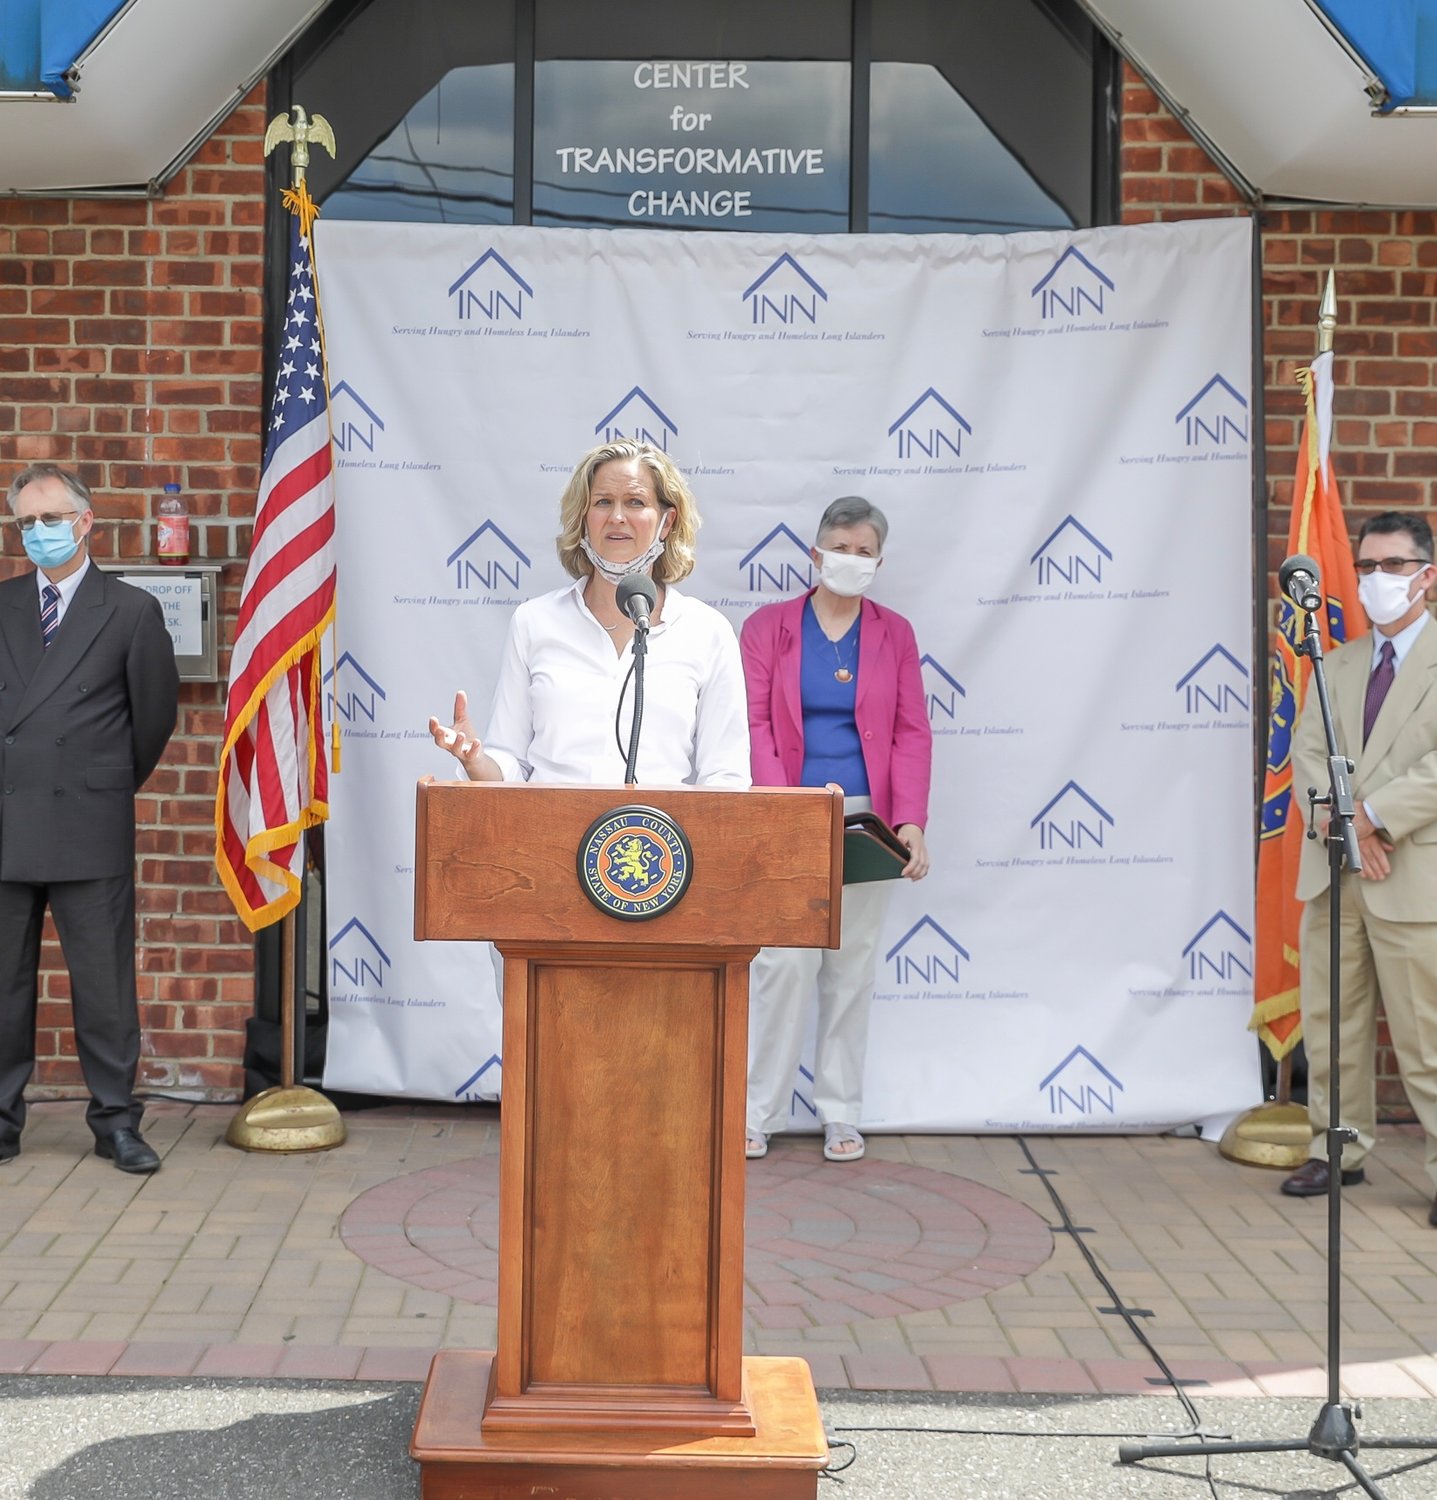 Nassau County Executive Laura Curran announced the allocation of federal grant funds in late July outside the Center for Transformative Change at the Mary Brennan INN in Hempstead, which also received funding.